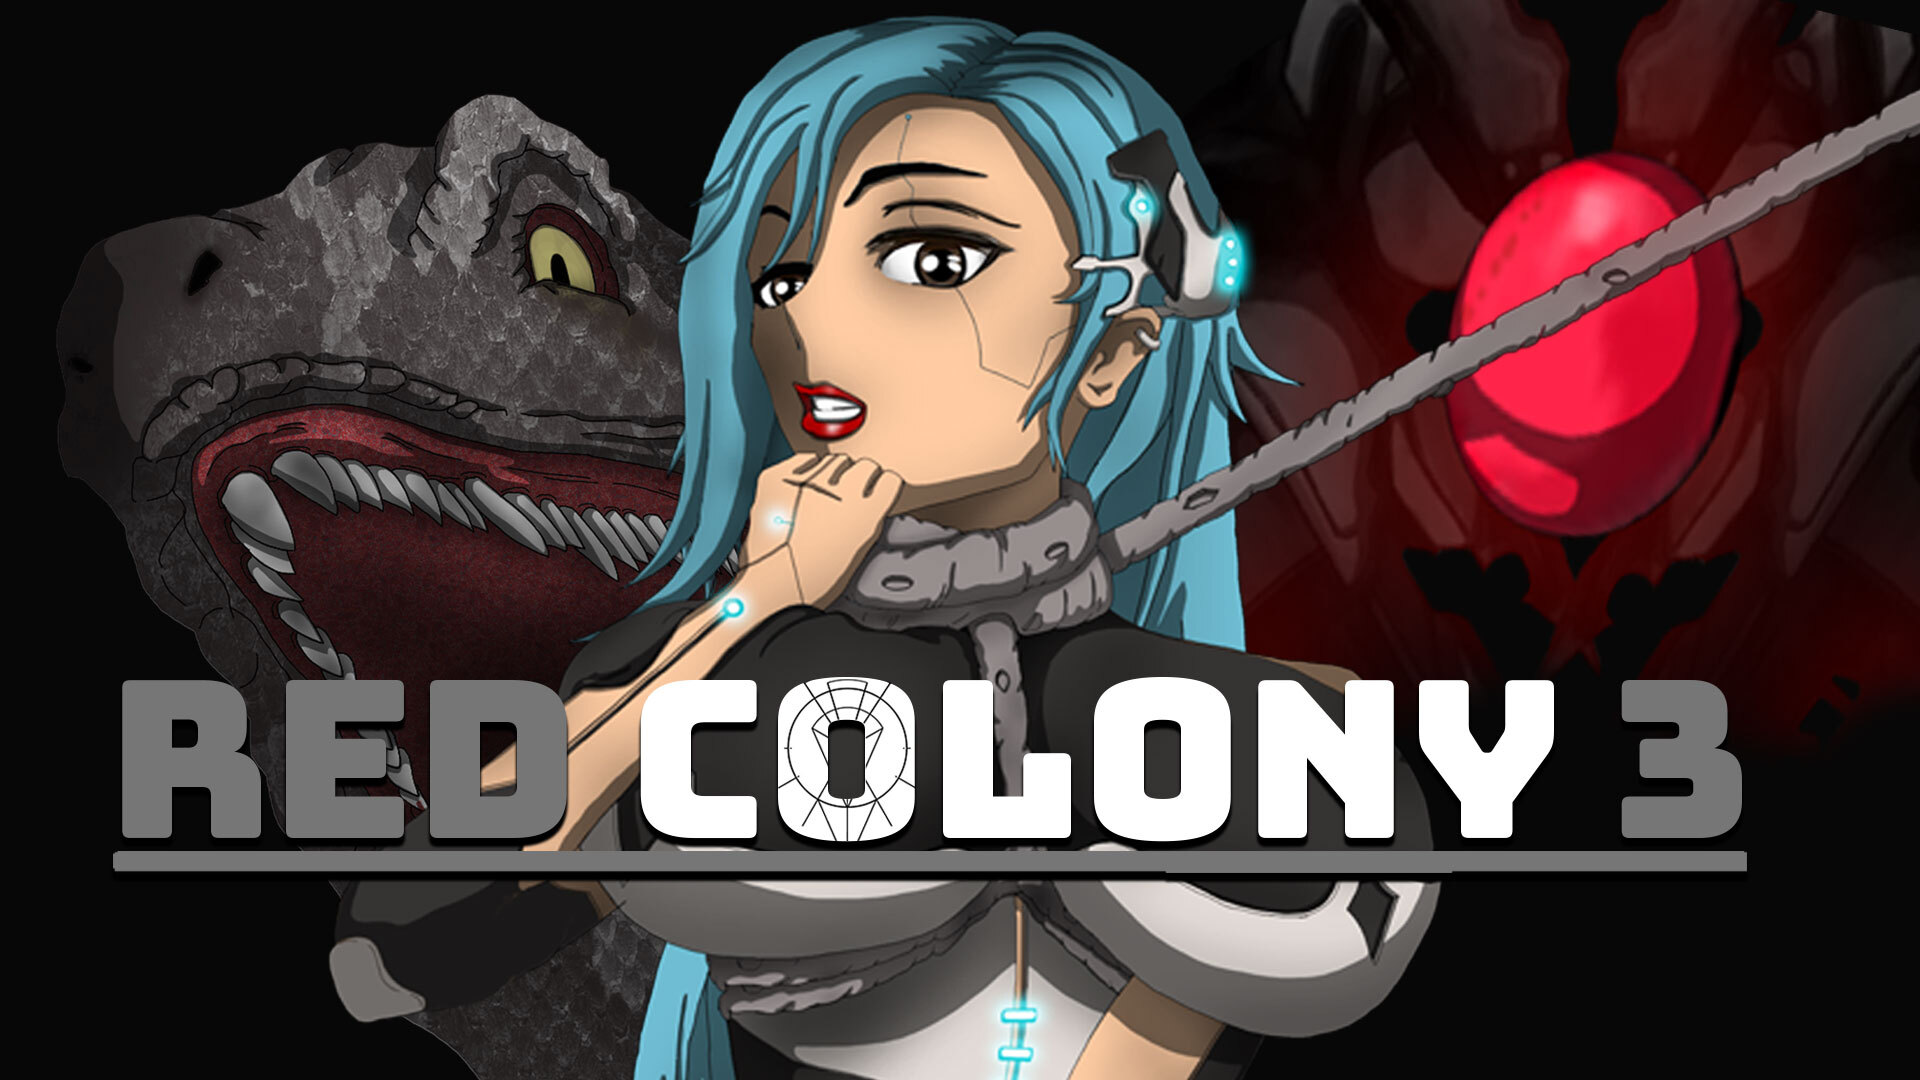 Red Colony 3 Uncensored